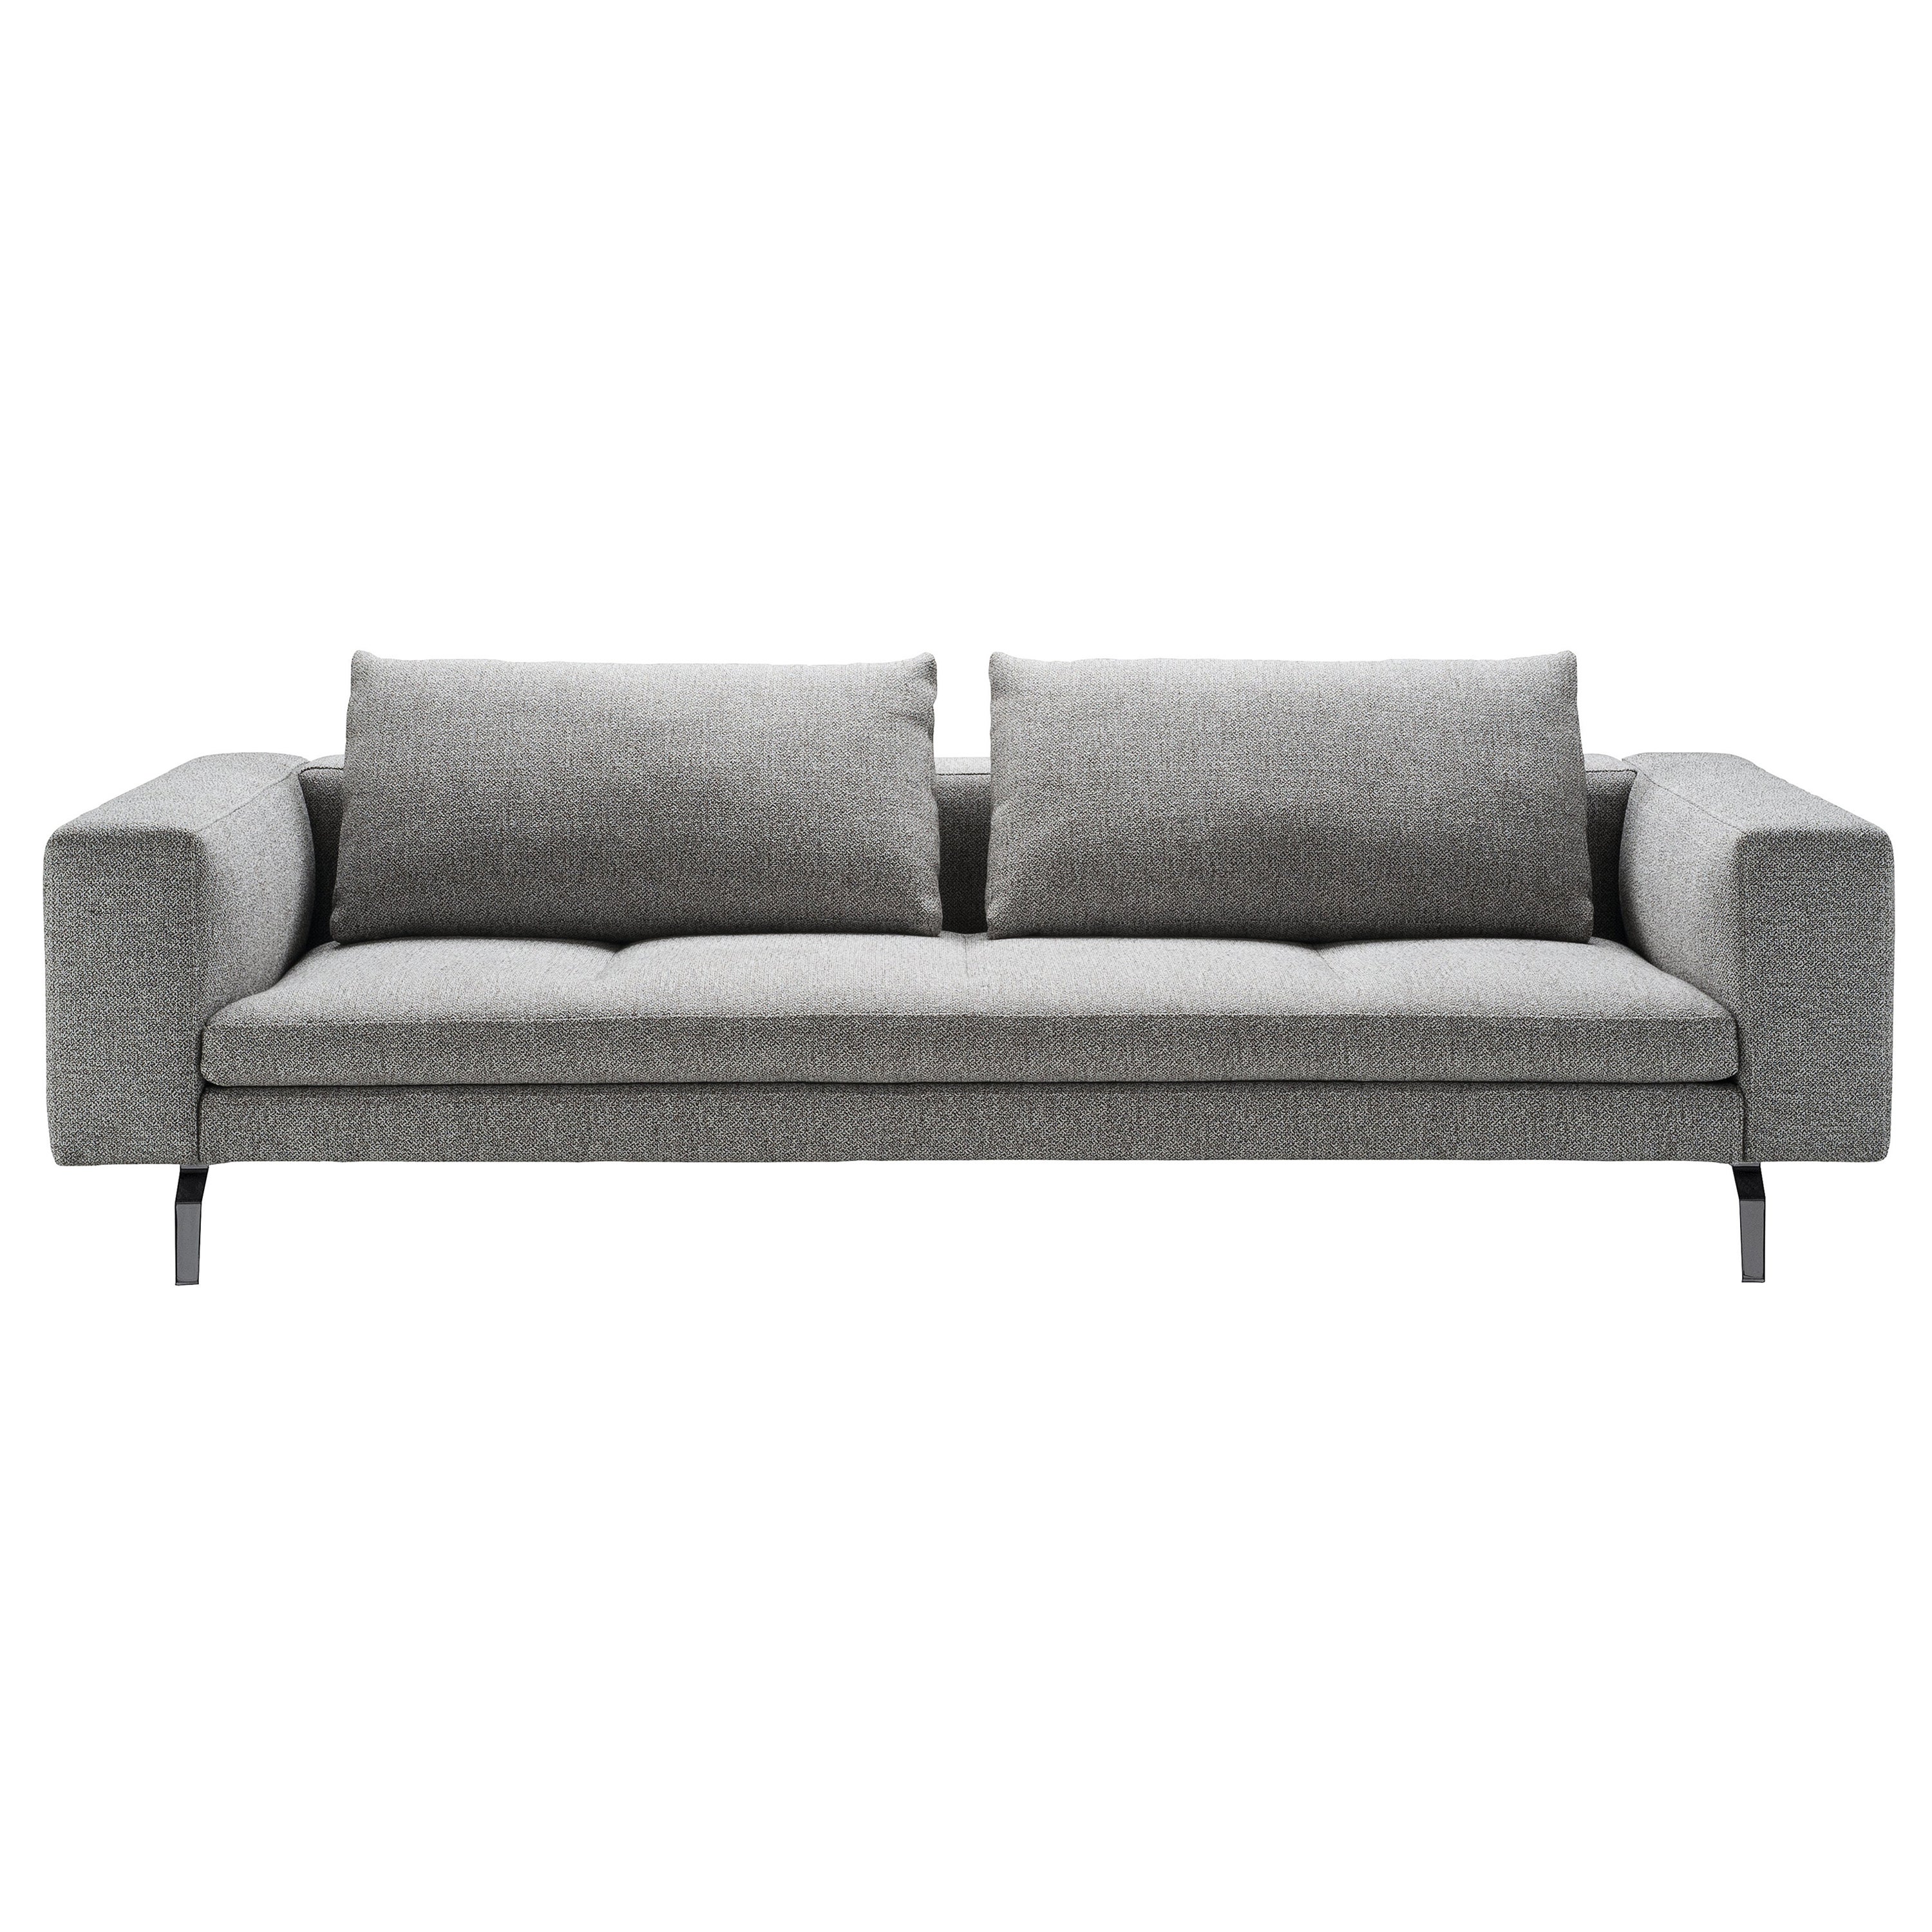 Zanotta Medium Bruce Sofa in Grey Upholstery with Black Painted Steel Frame For Sale